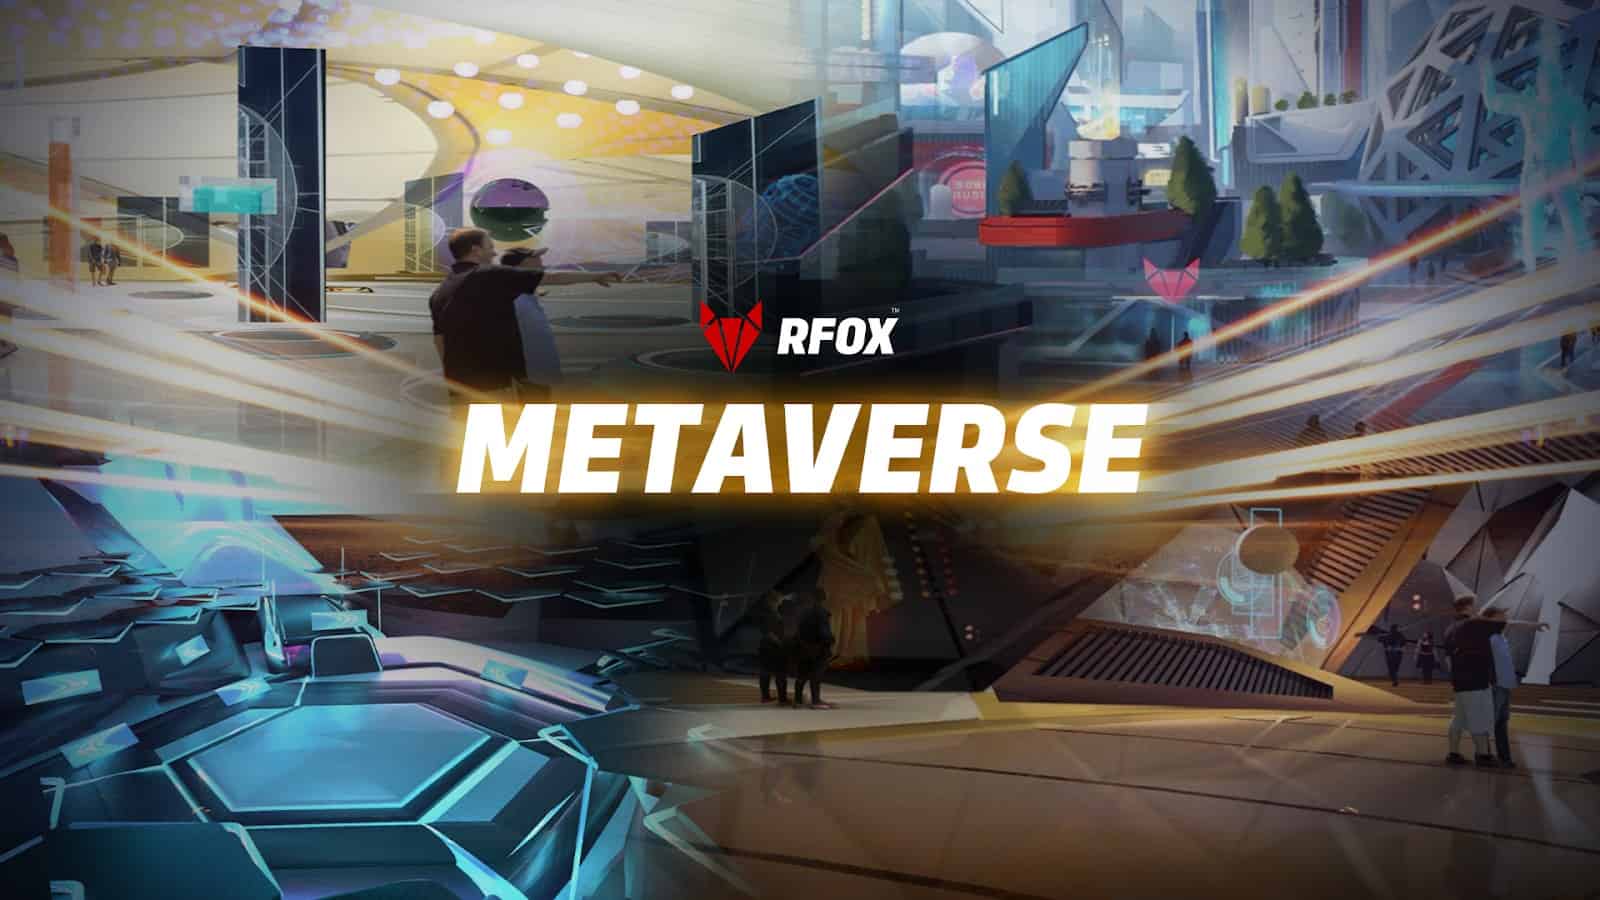 Rfox:-building-the-metaverse-for-all